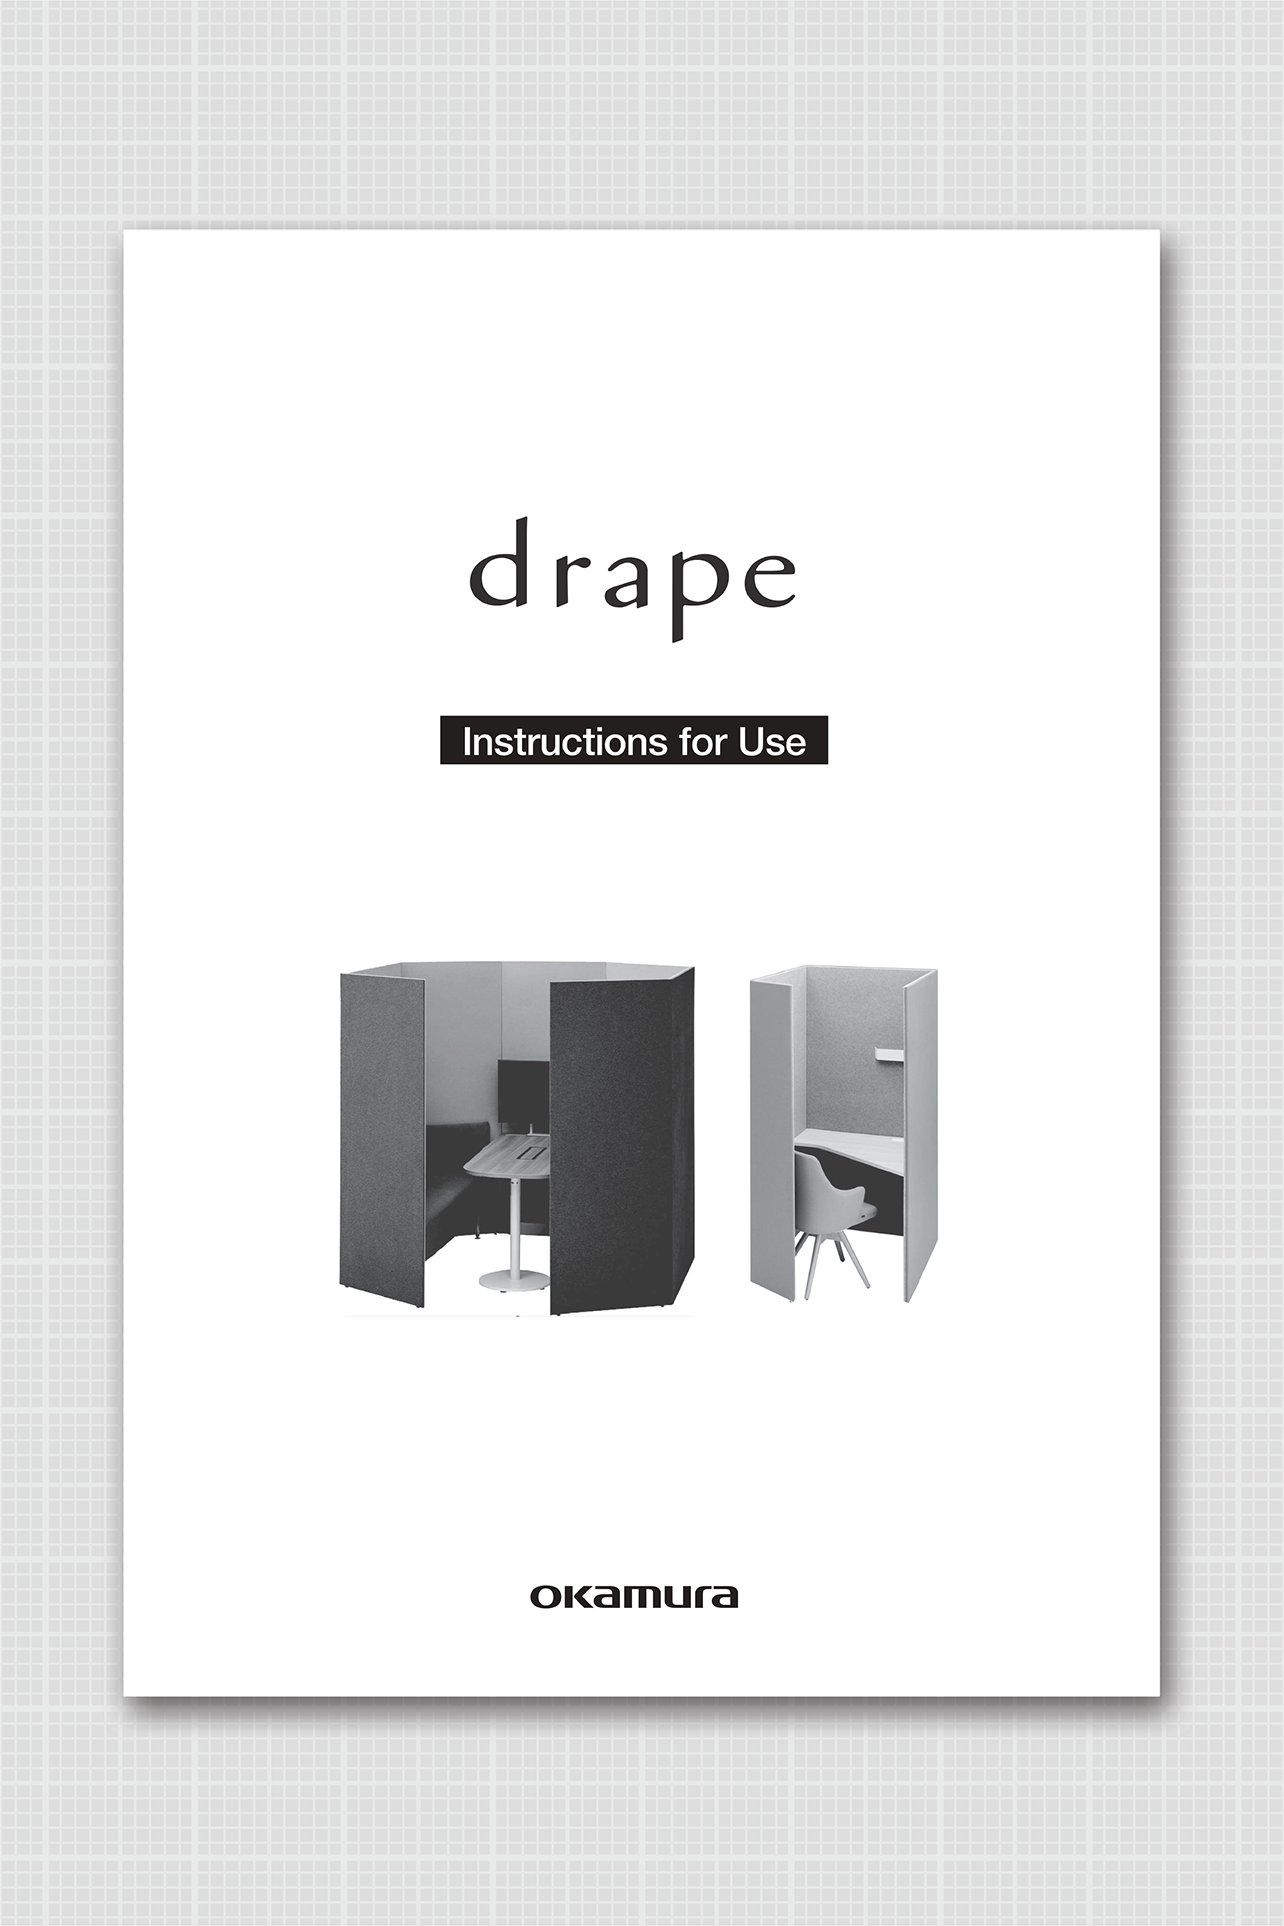 drape Instructions for Use